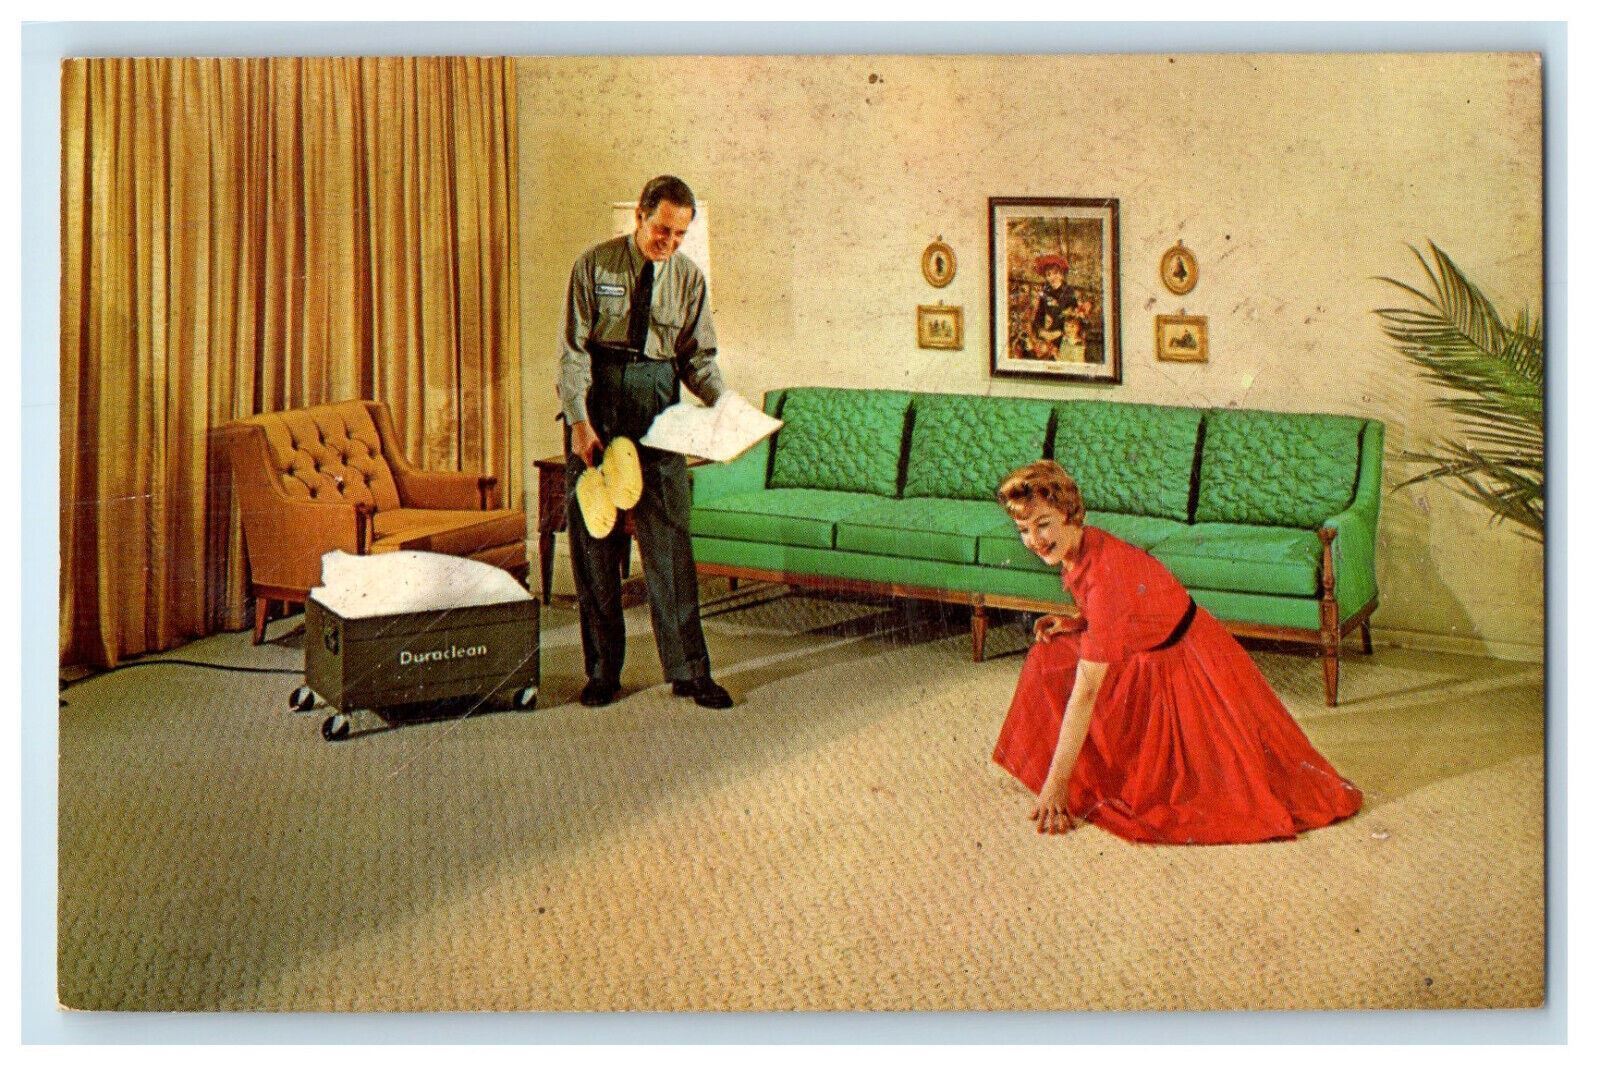 c1960s Lady Touching Floor, Duraclean Absorption Process Vintage Postcard